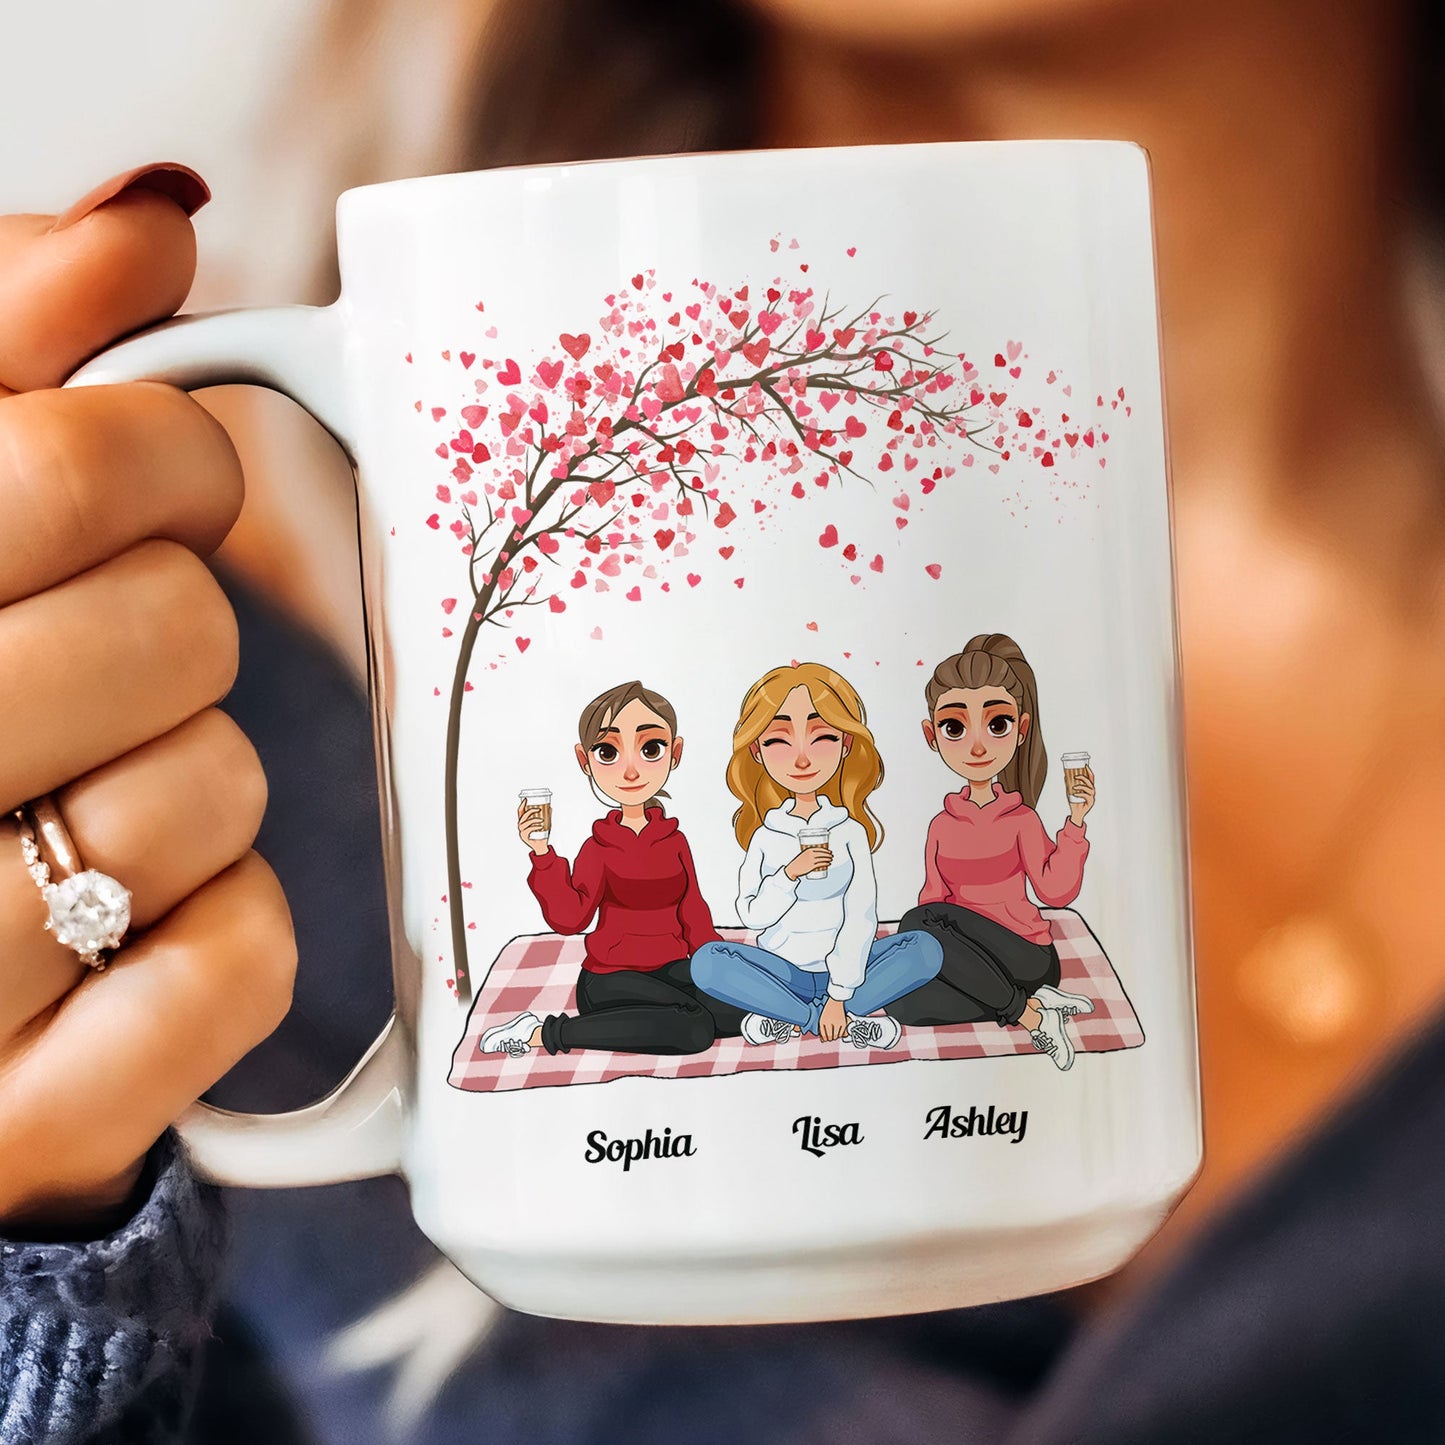 I Would Fight A Bear For You Sister - Personalized Mug